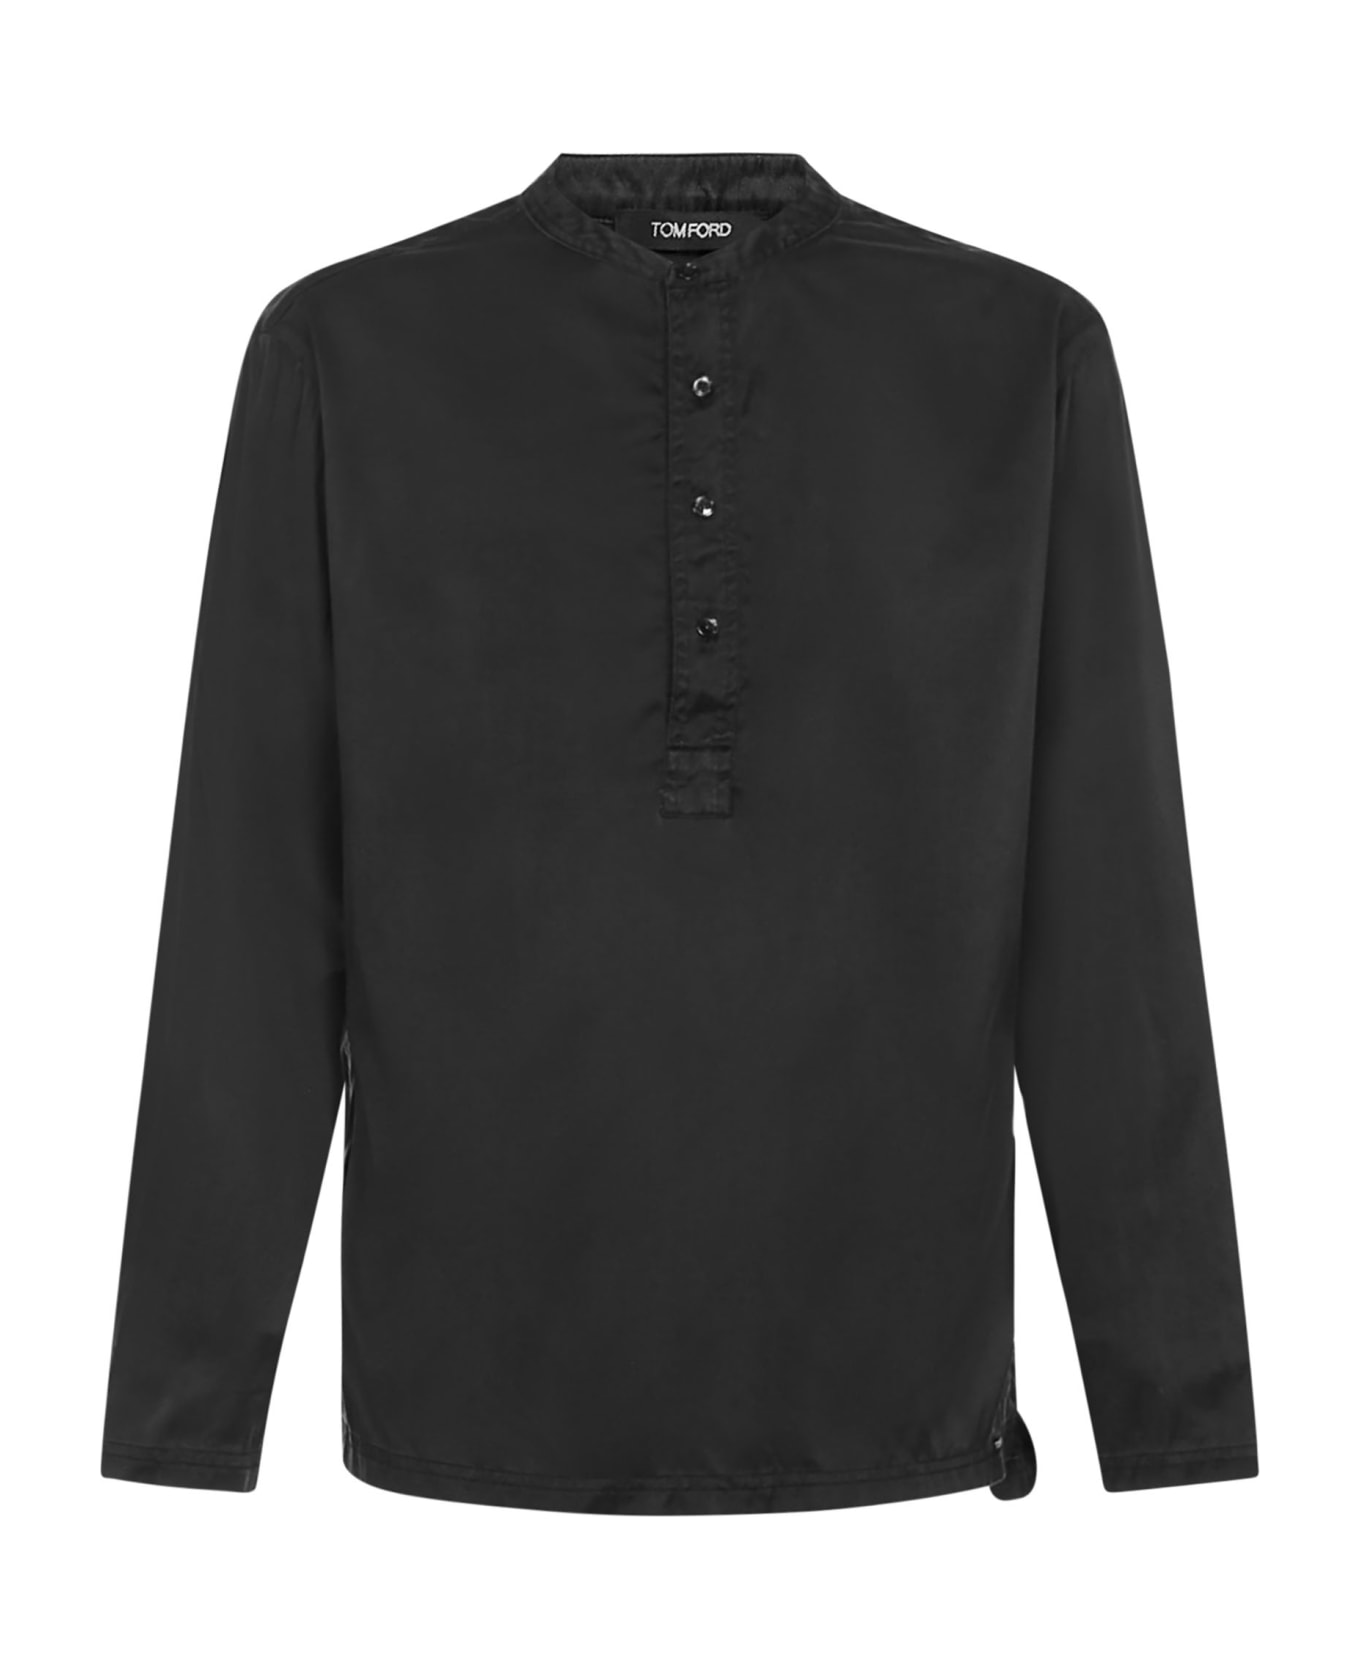 Tom Ford Henley Pajama - Black パジャマ